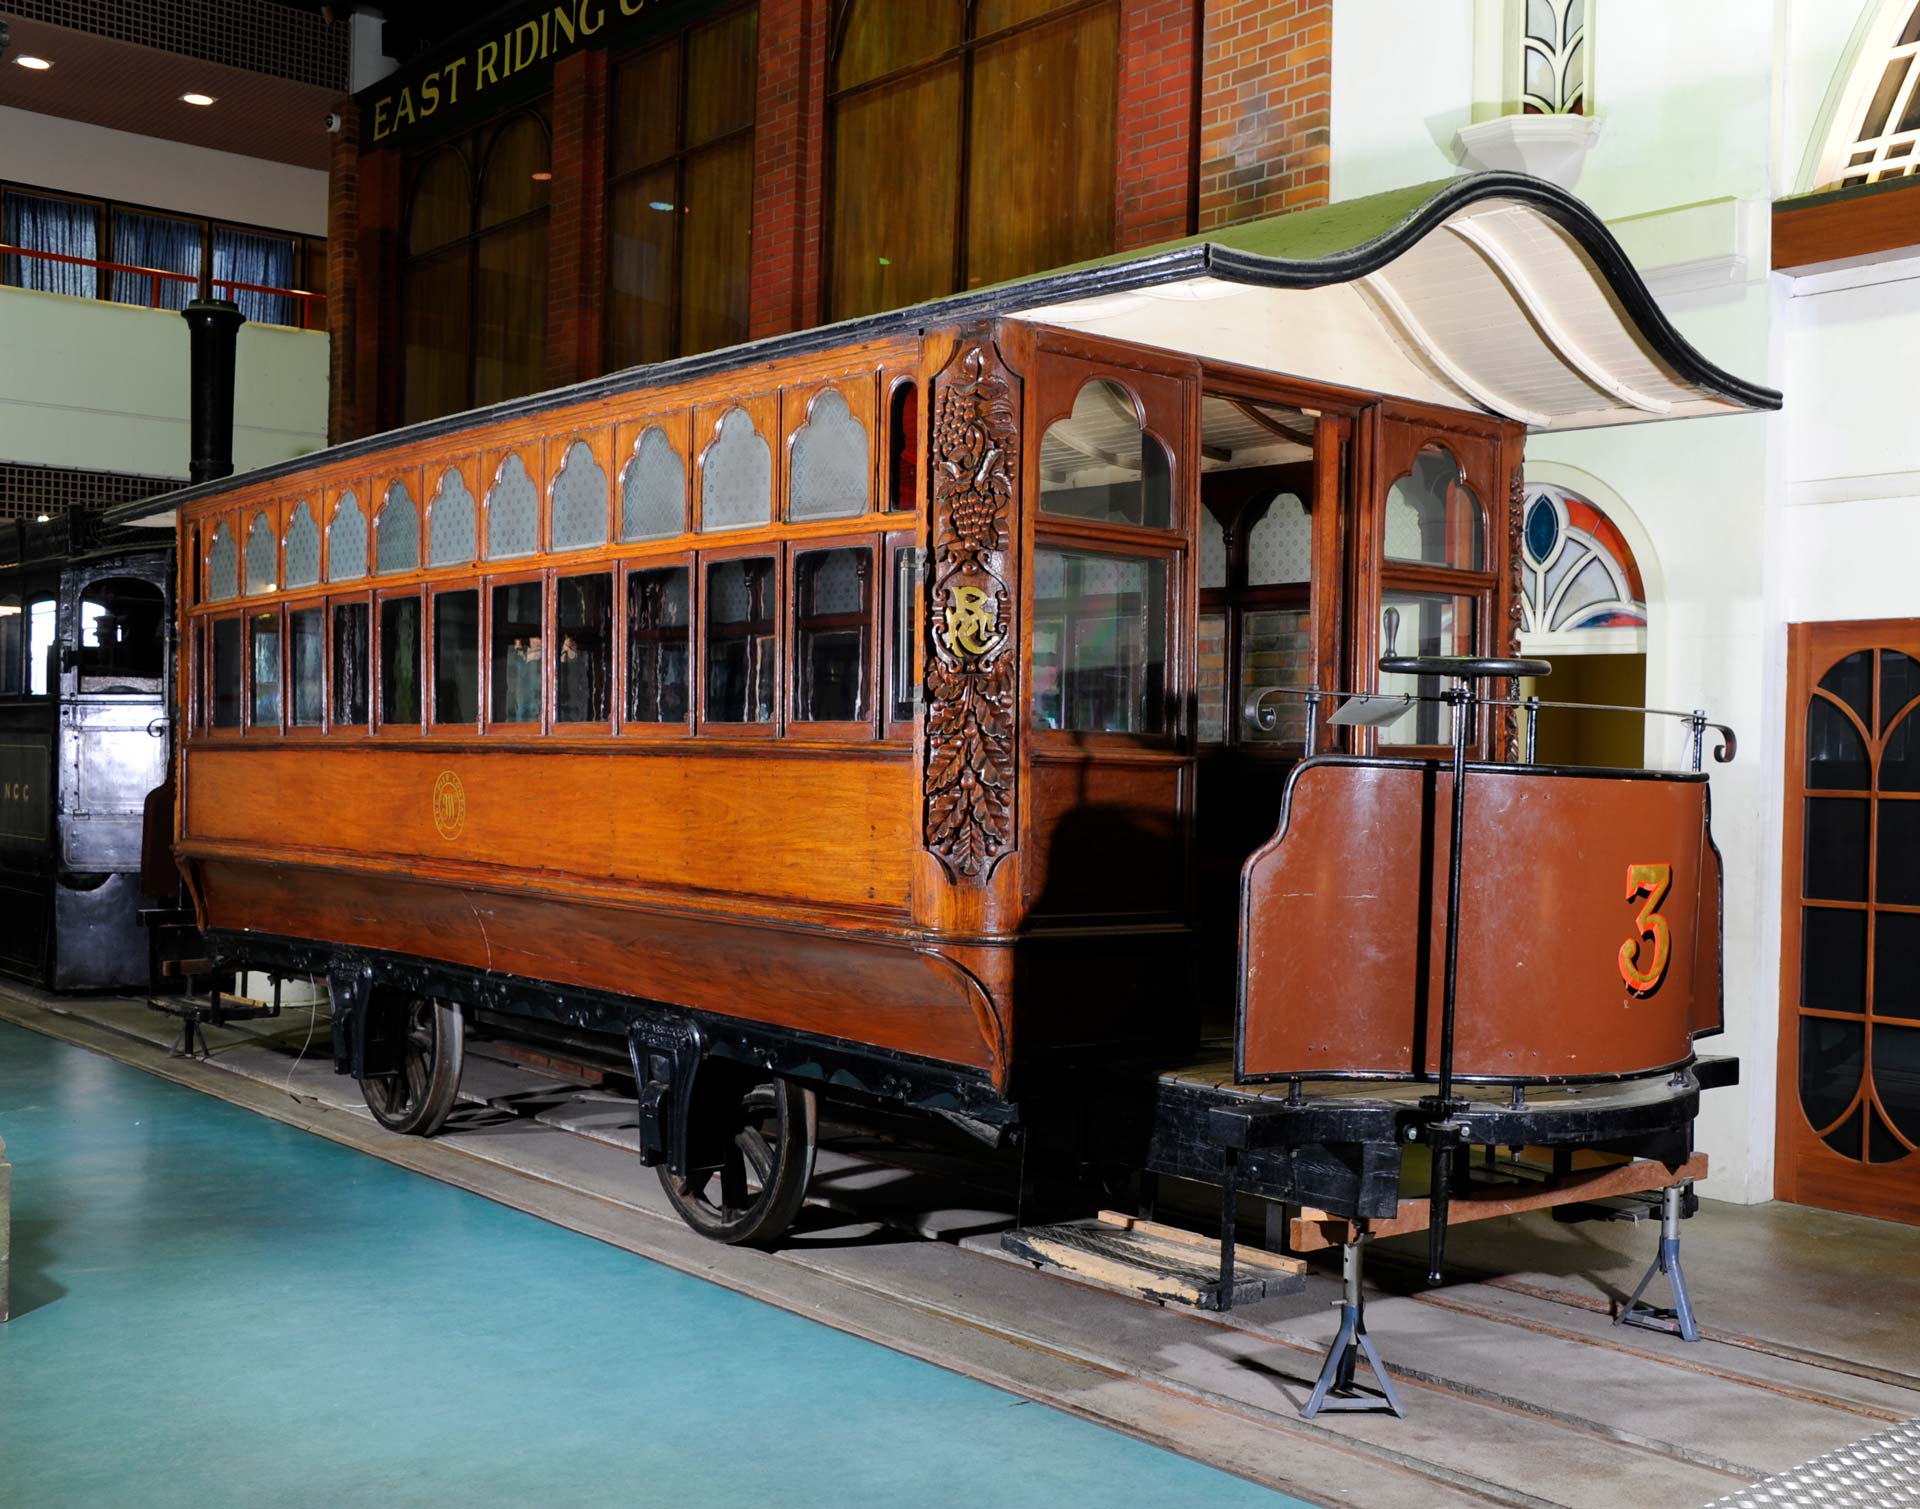 A vintage wooden tram in a museum